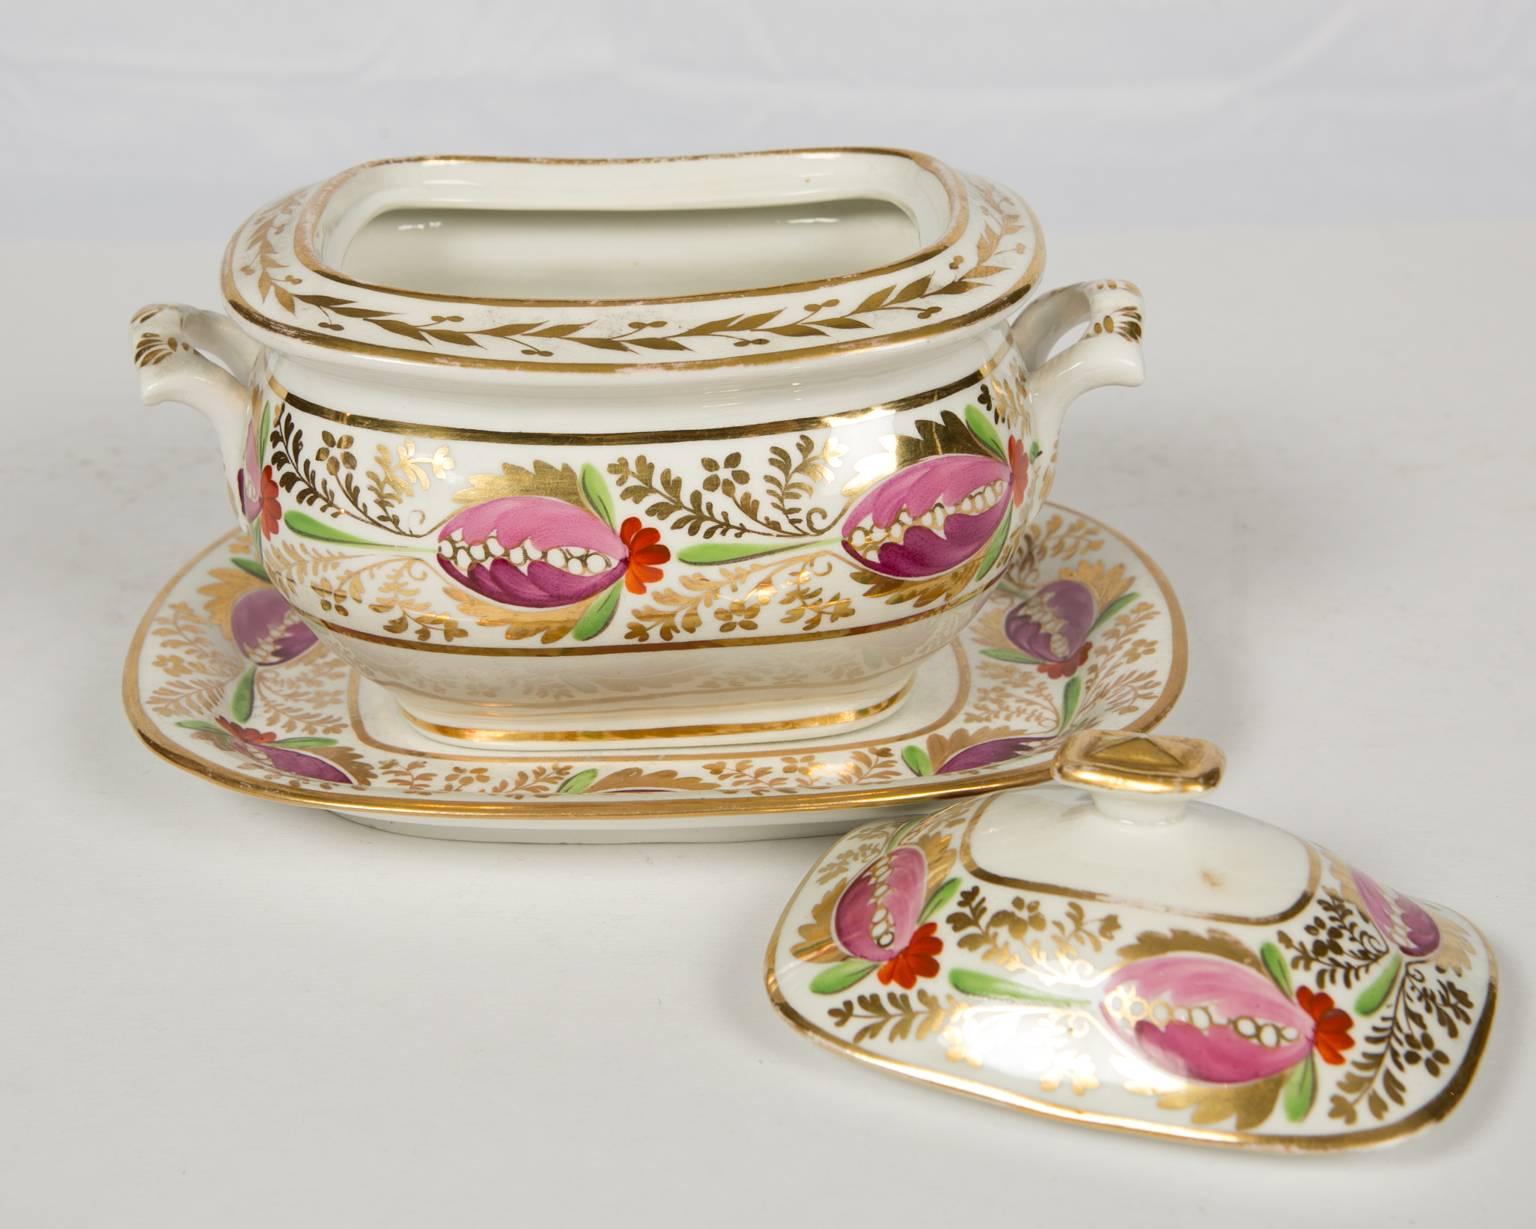 Mid-19th Century Floral and Gilt Covered Sugar Box and Stand Made circa 1830